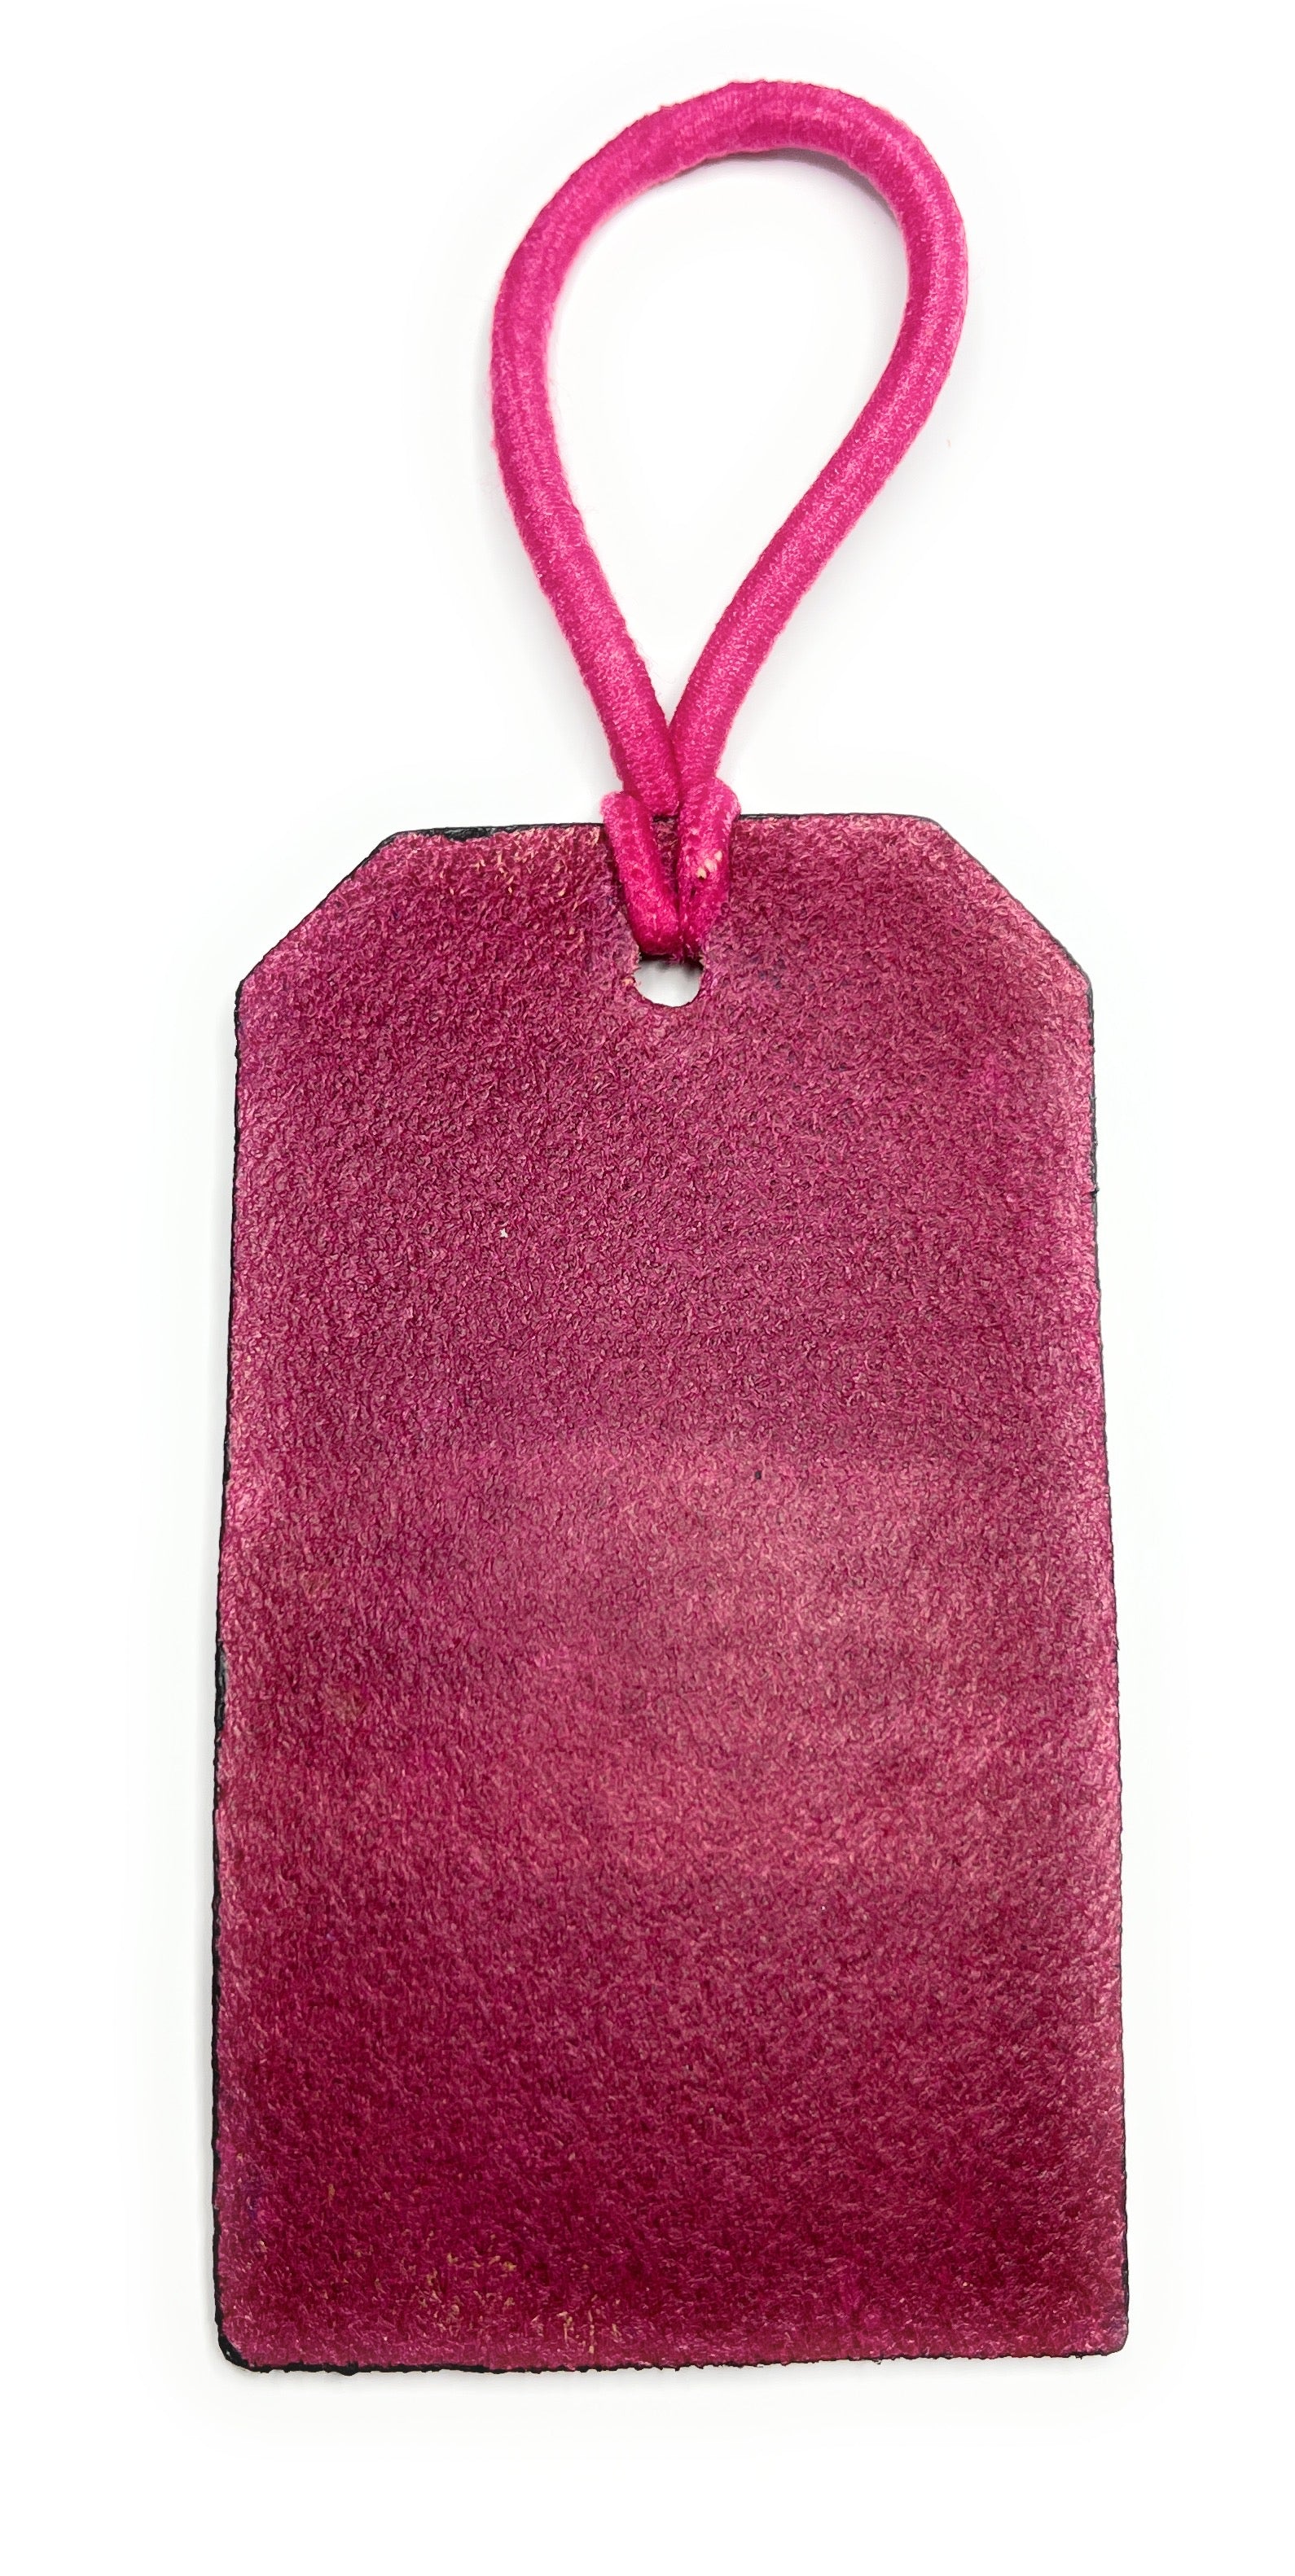 Pink Leather Luggage Tag - Country from my Cowboy Boots to my Down Home Roots